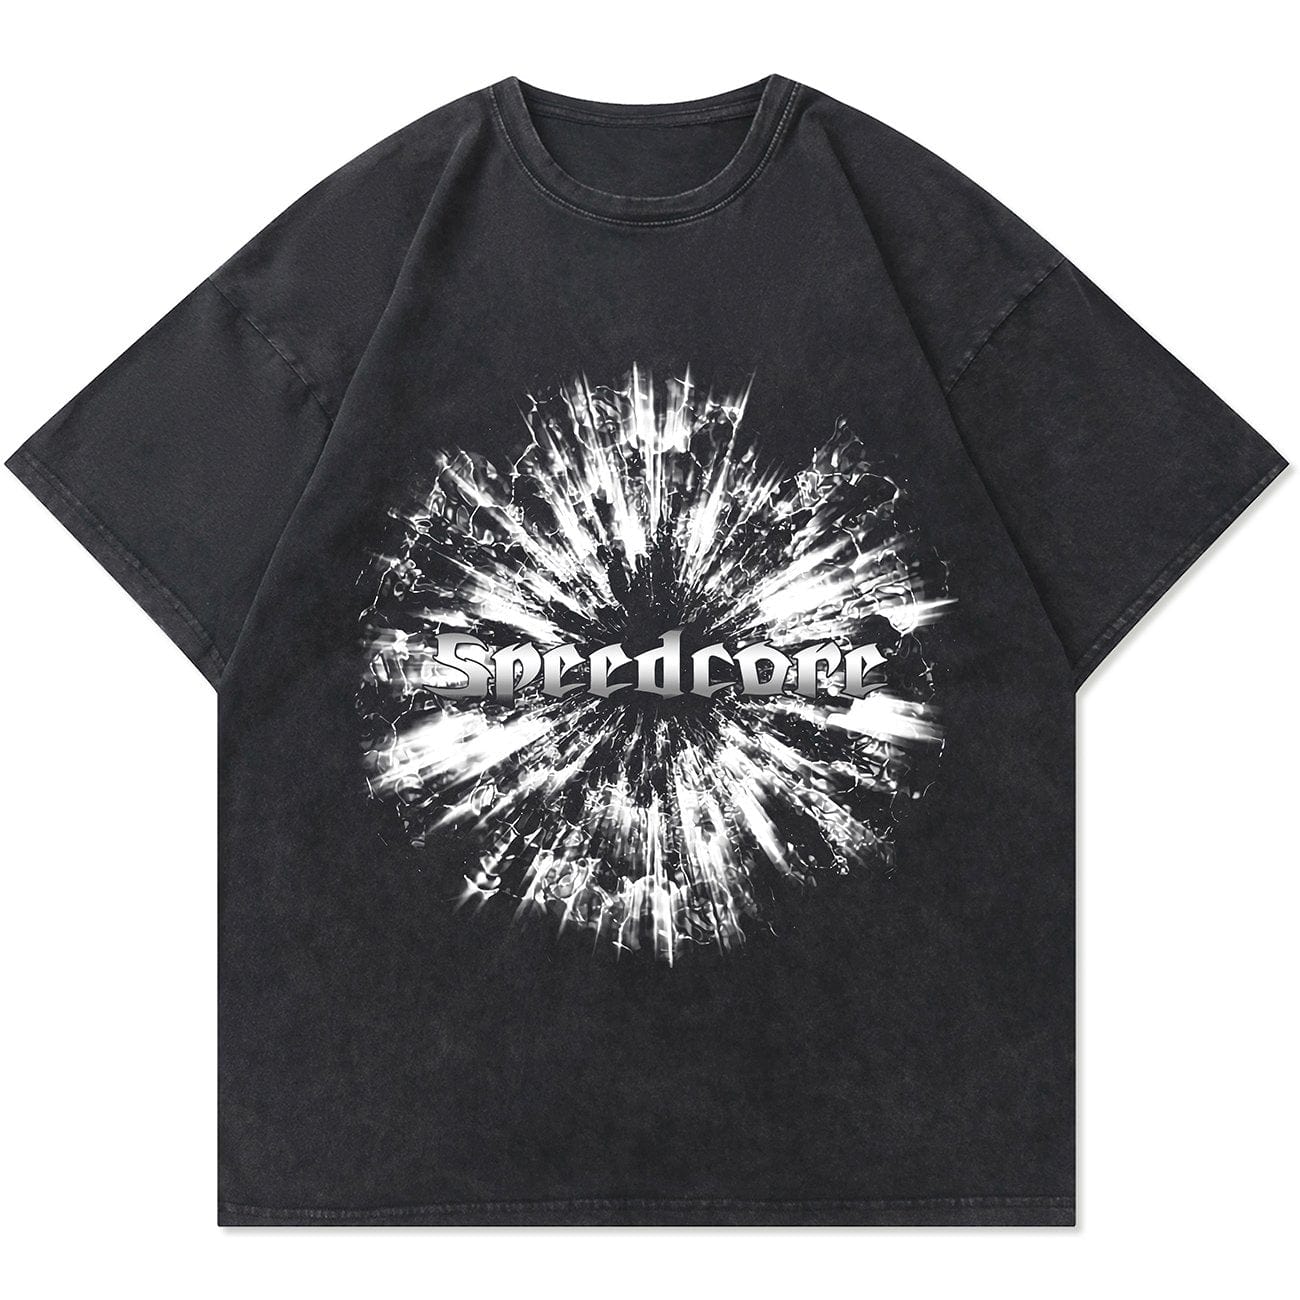 Washed Explosion Lightning Graphic Tee Streetwear Brand Techwear Combat Tactical YUGEN THEORY